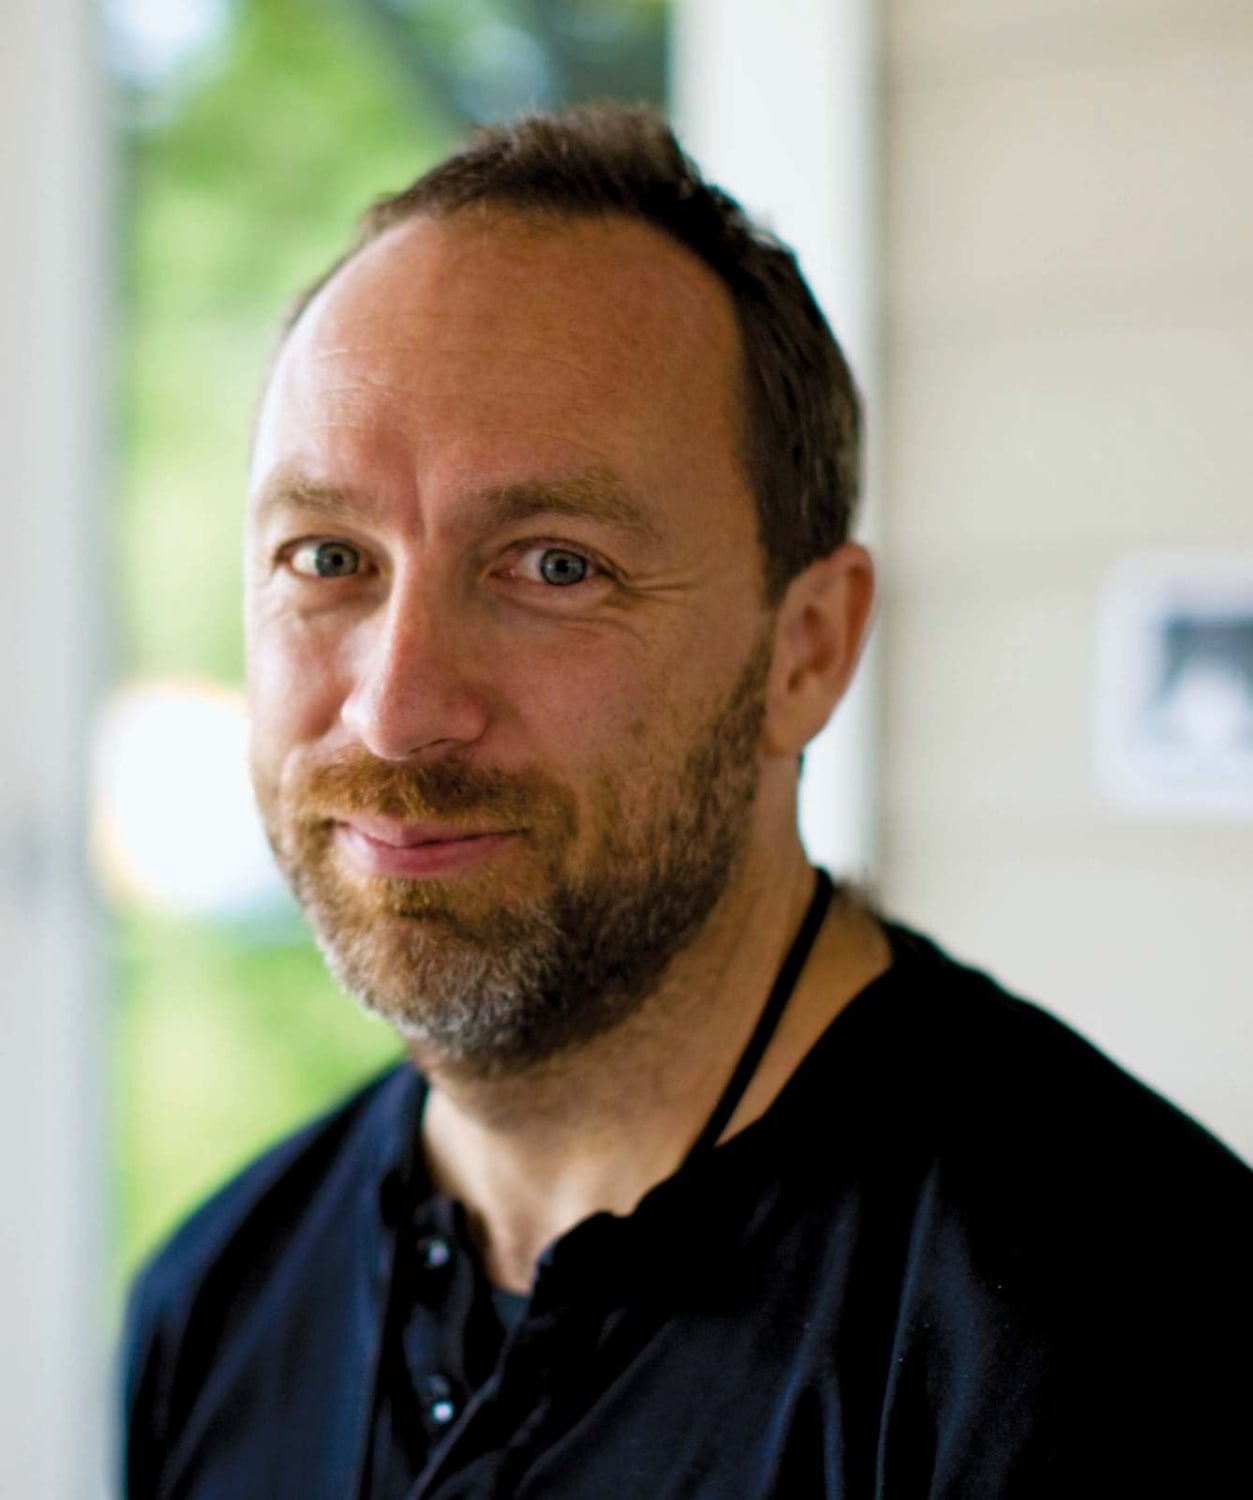 How many people know that Jimmy Wales is an objectivist, the philosophy of Ayn Rand?